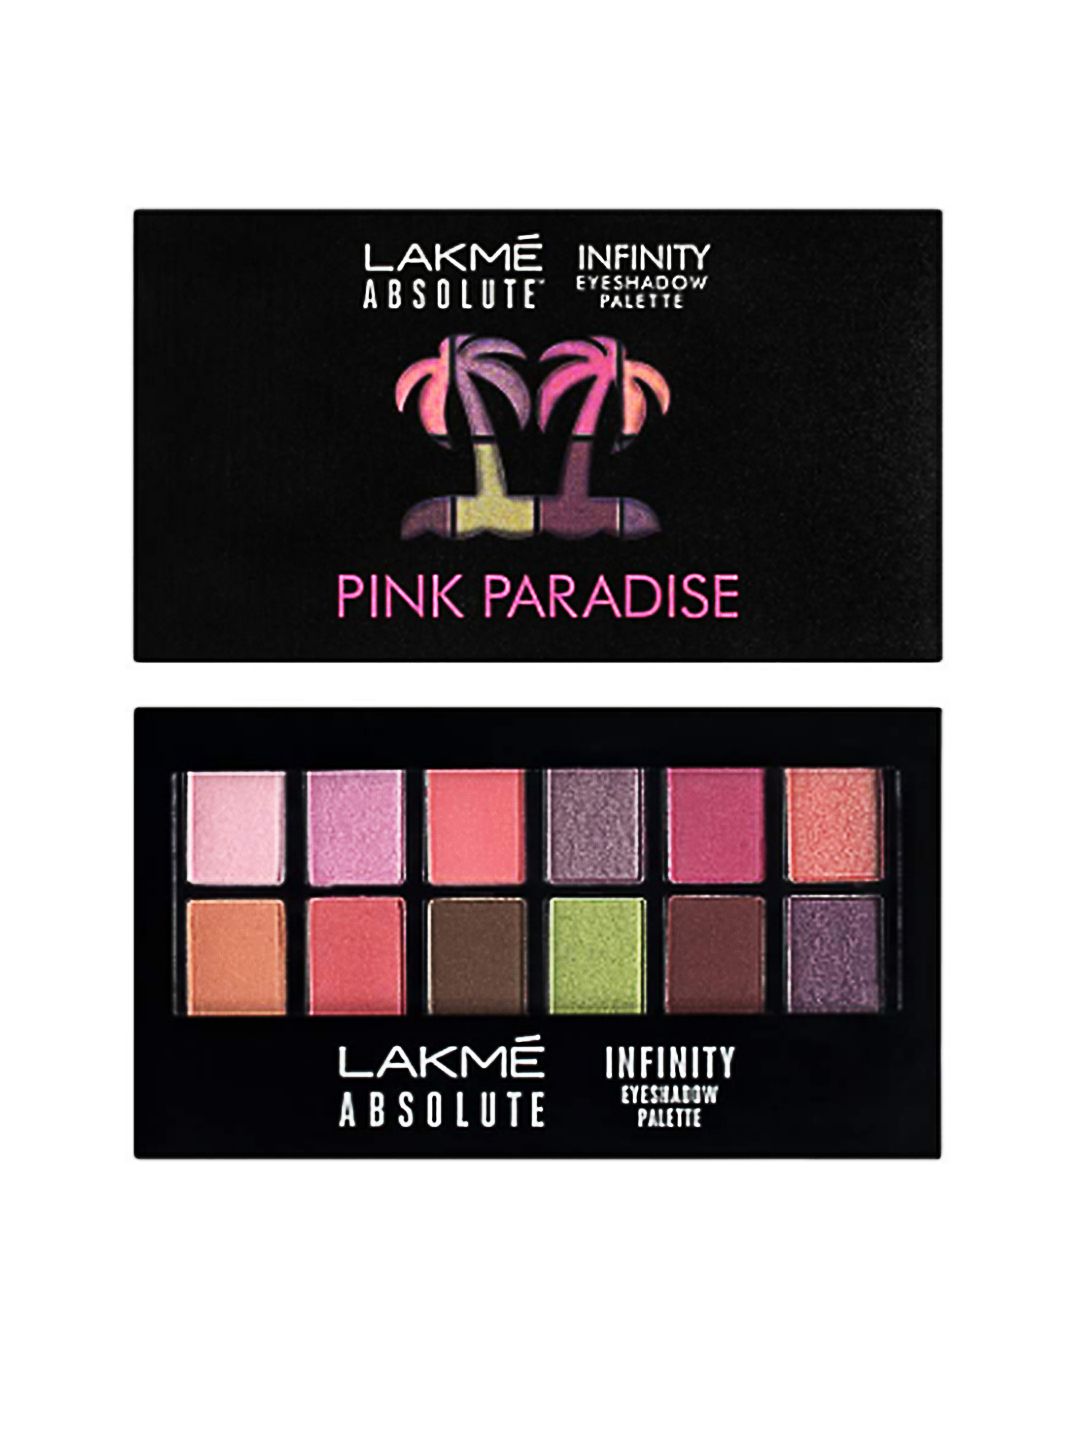 Lakme Absolute Infinity Eyeshadow Palette - Pink Paradise 12 g Price in India